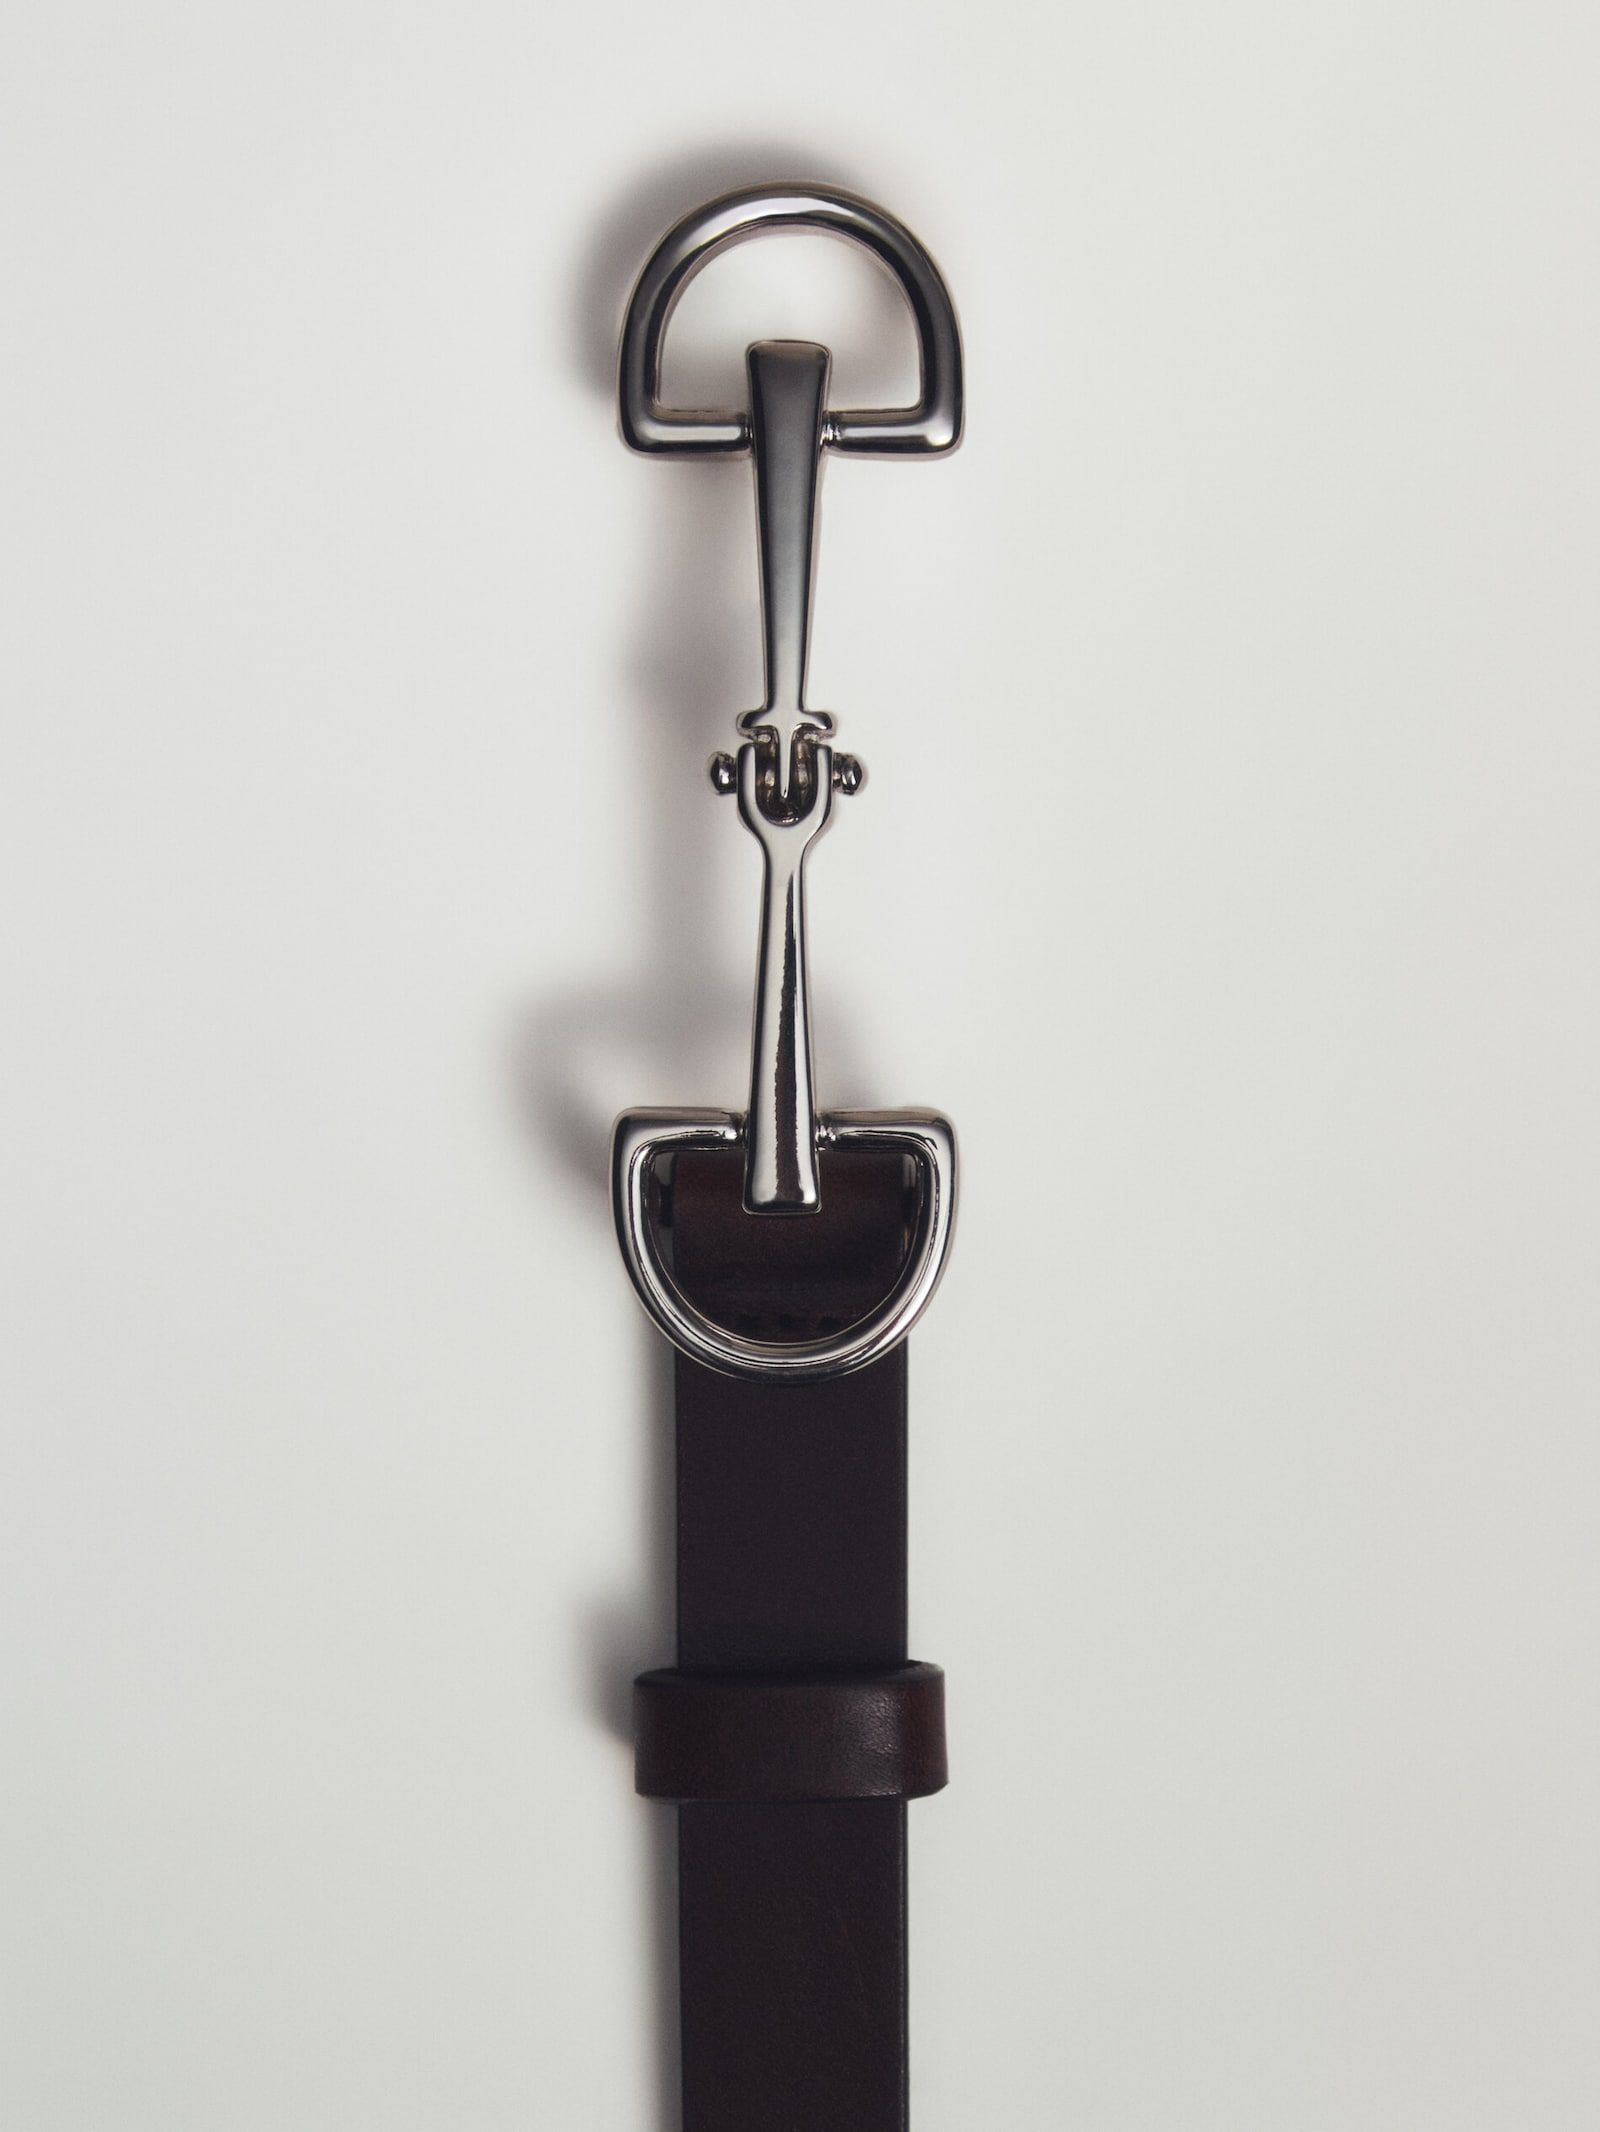 Leather belt with double long buckle | Massimo Dutti (US)